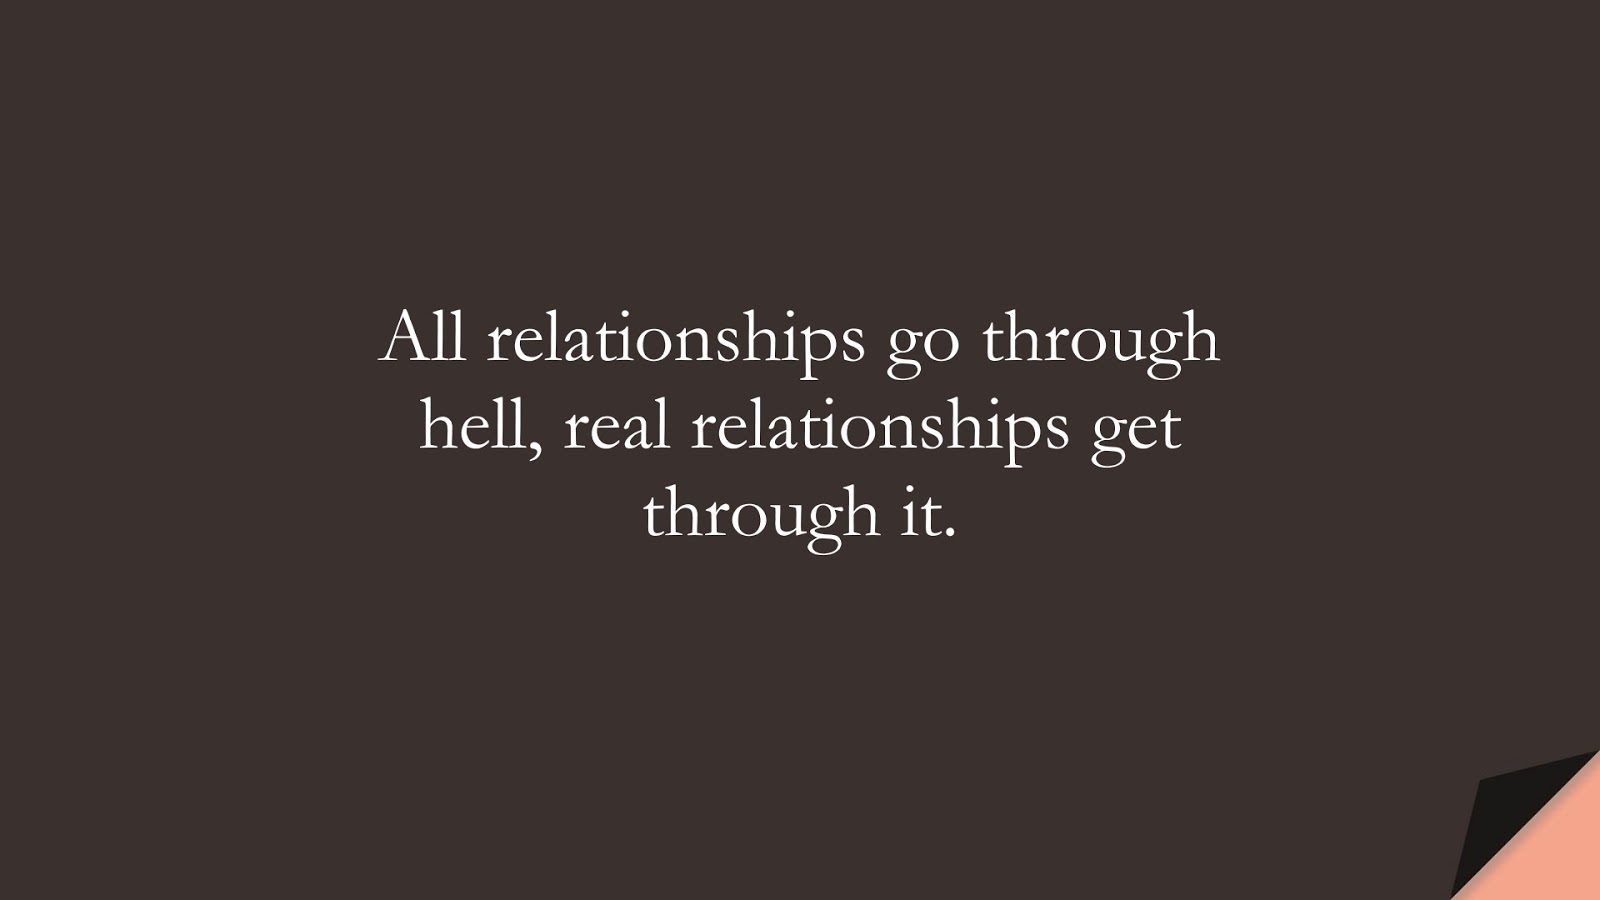 All relationships go through hell, real relationships get through it.FALSE